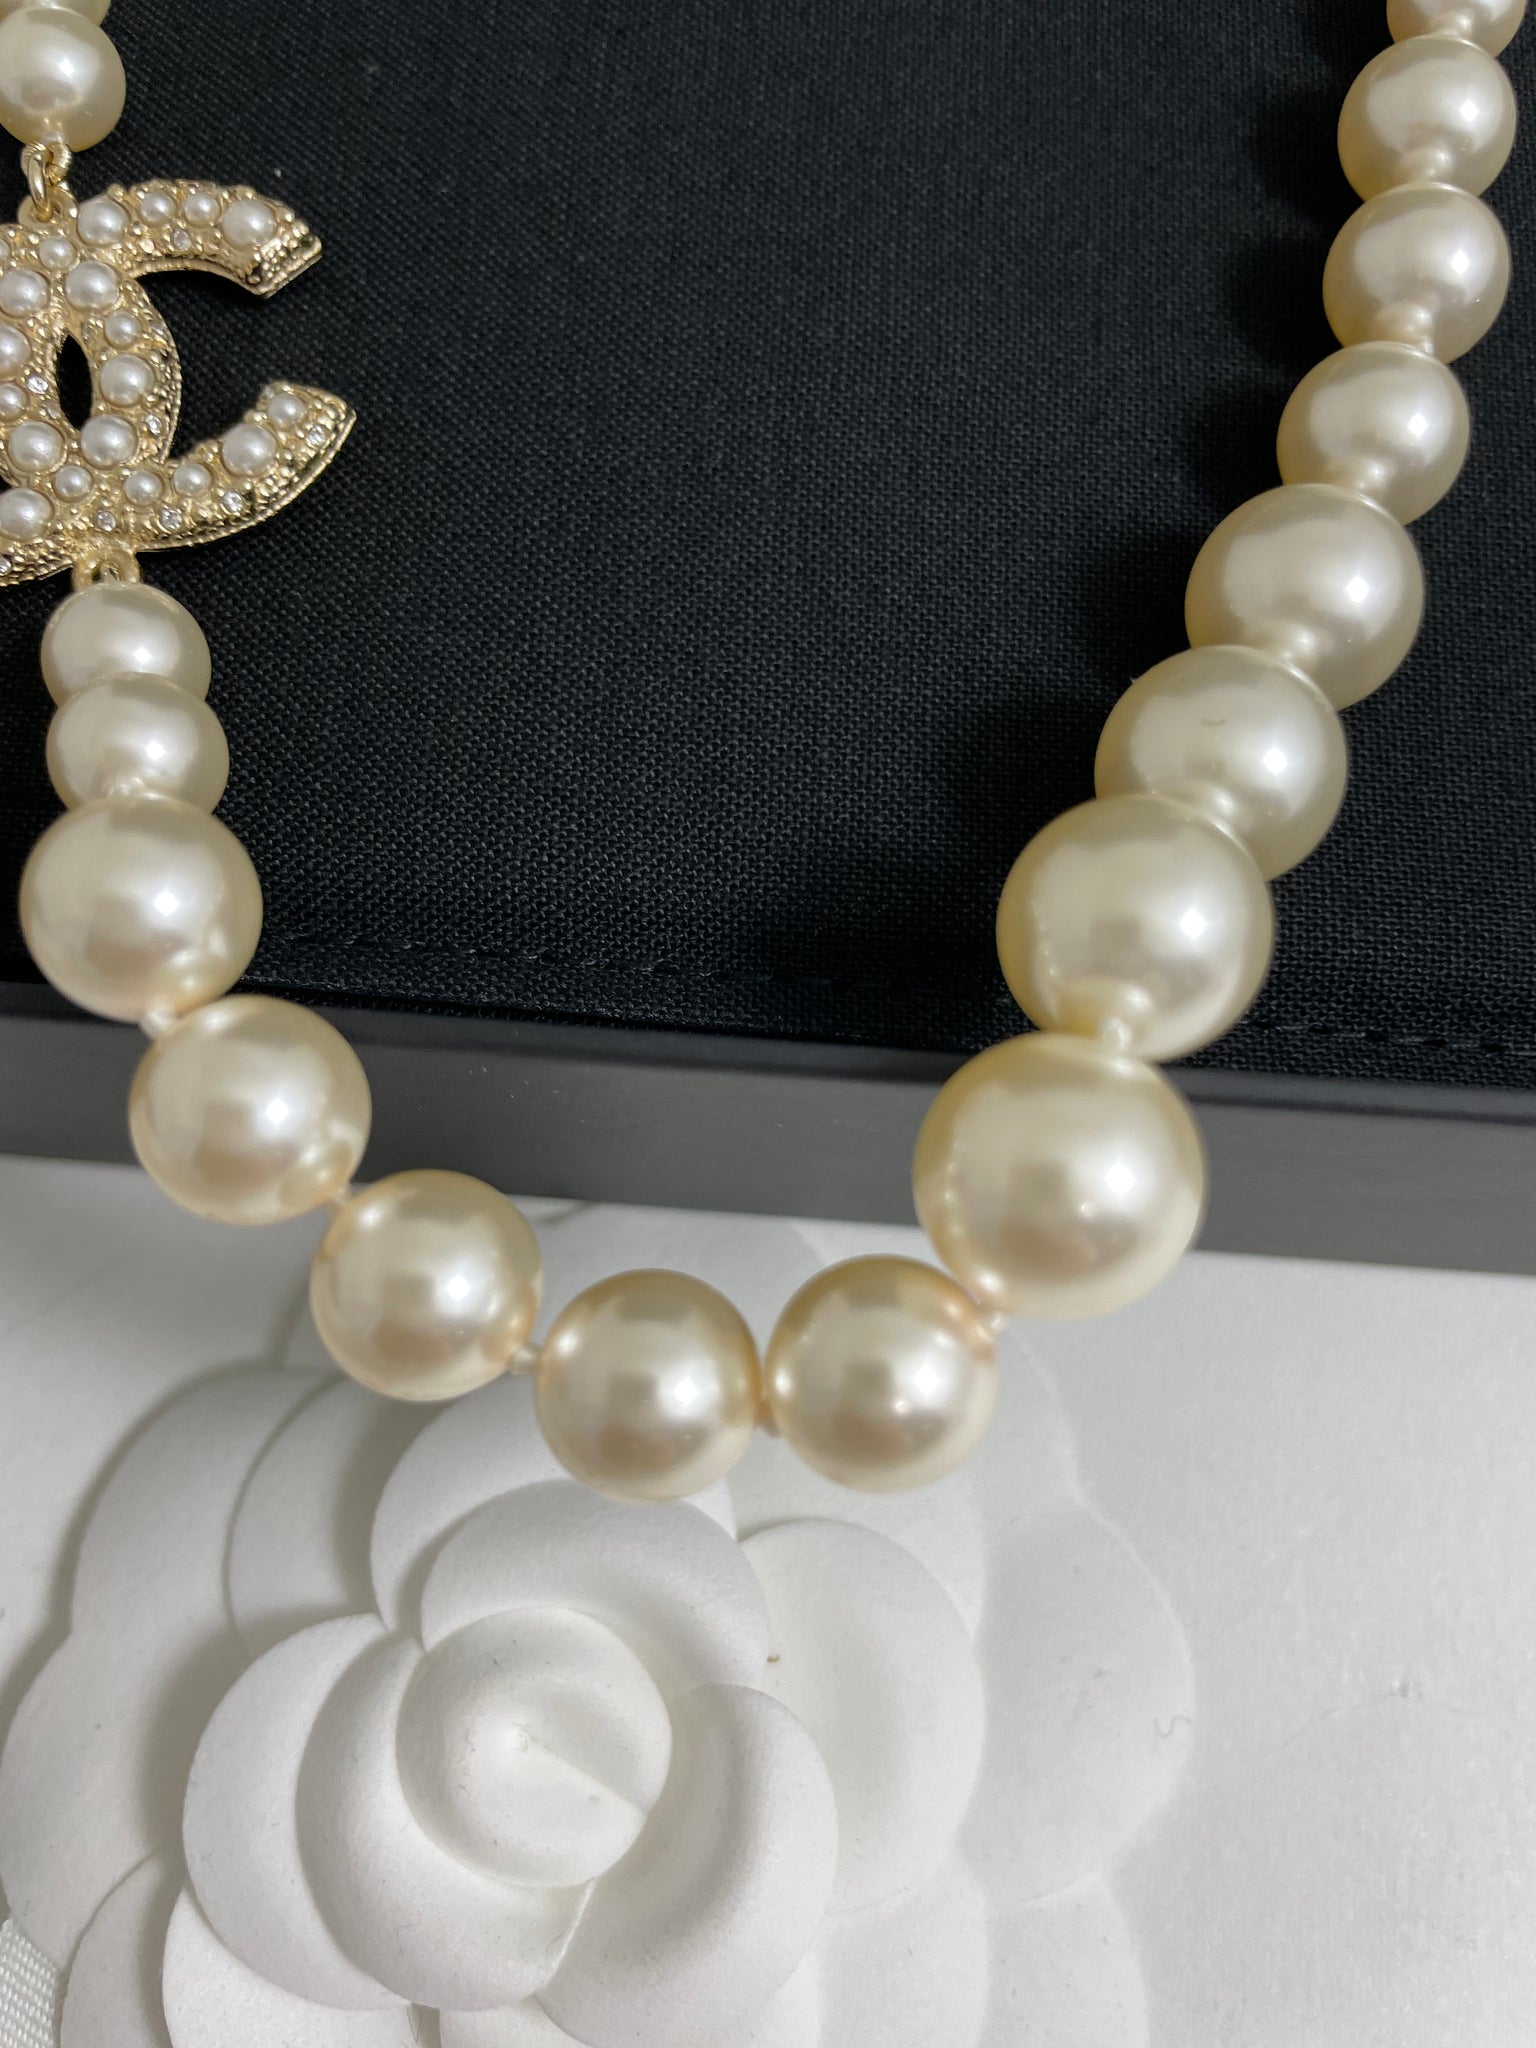 AUTH. CHANEL NWT 2022 CHANEL 100 ANNIVERSARY PEARL CC LOGO CHOKER NECKLACE  16